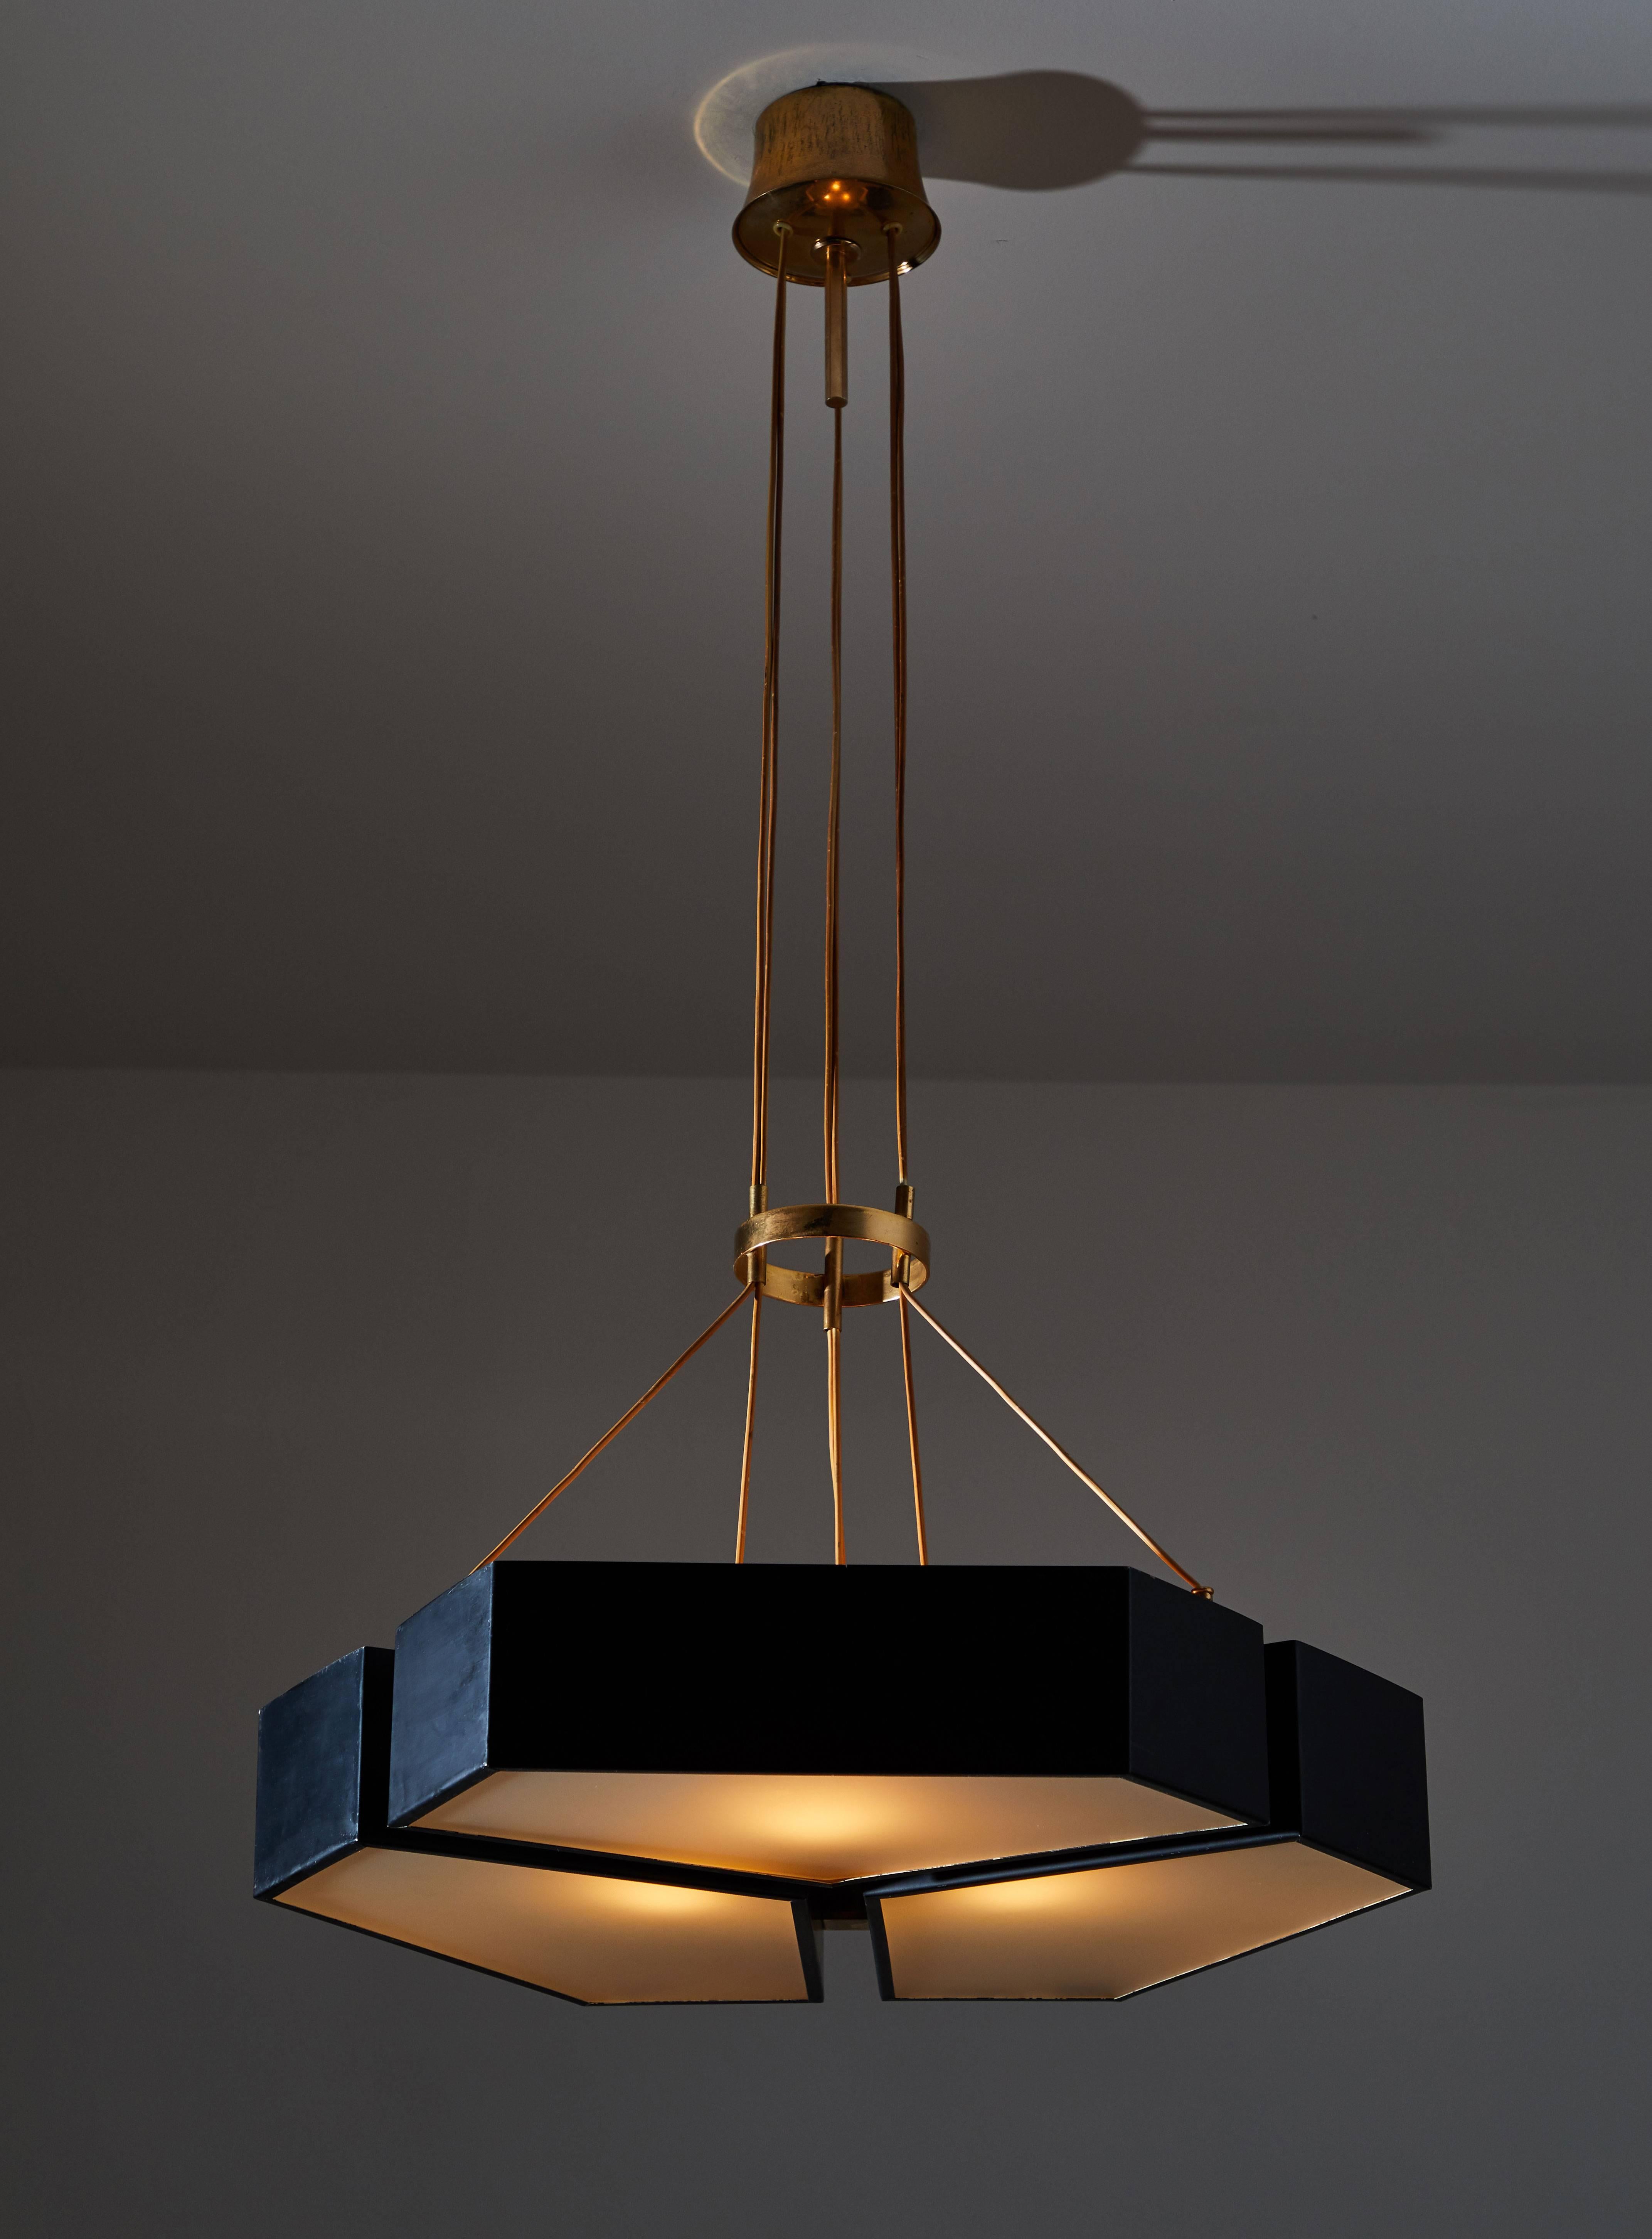 Rare chandelier by Bruno Chiarini. Designed and manufactured in Italy, circa 1950s. Enameled metal, brass hardware and unique opaque glass diffusers. Rewired for US junction boxes. Original canopy. Takes three E27 60w maximum bulbs.